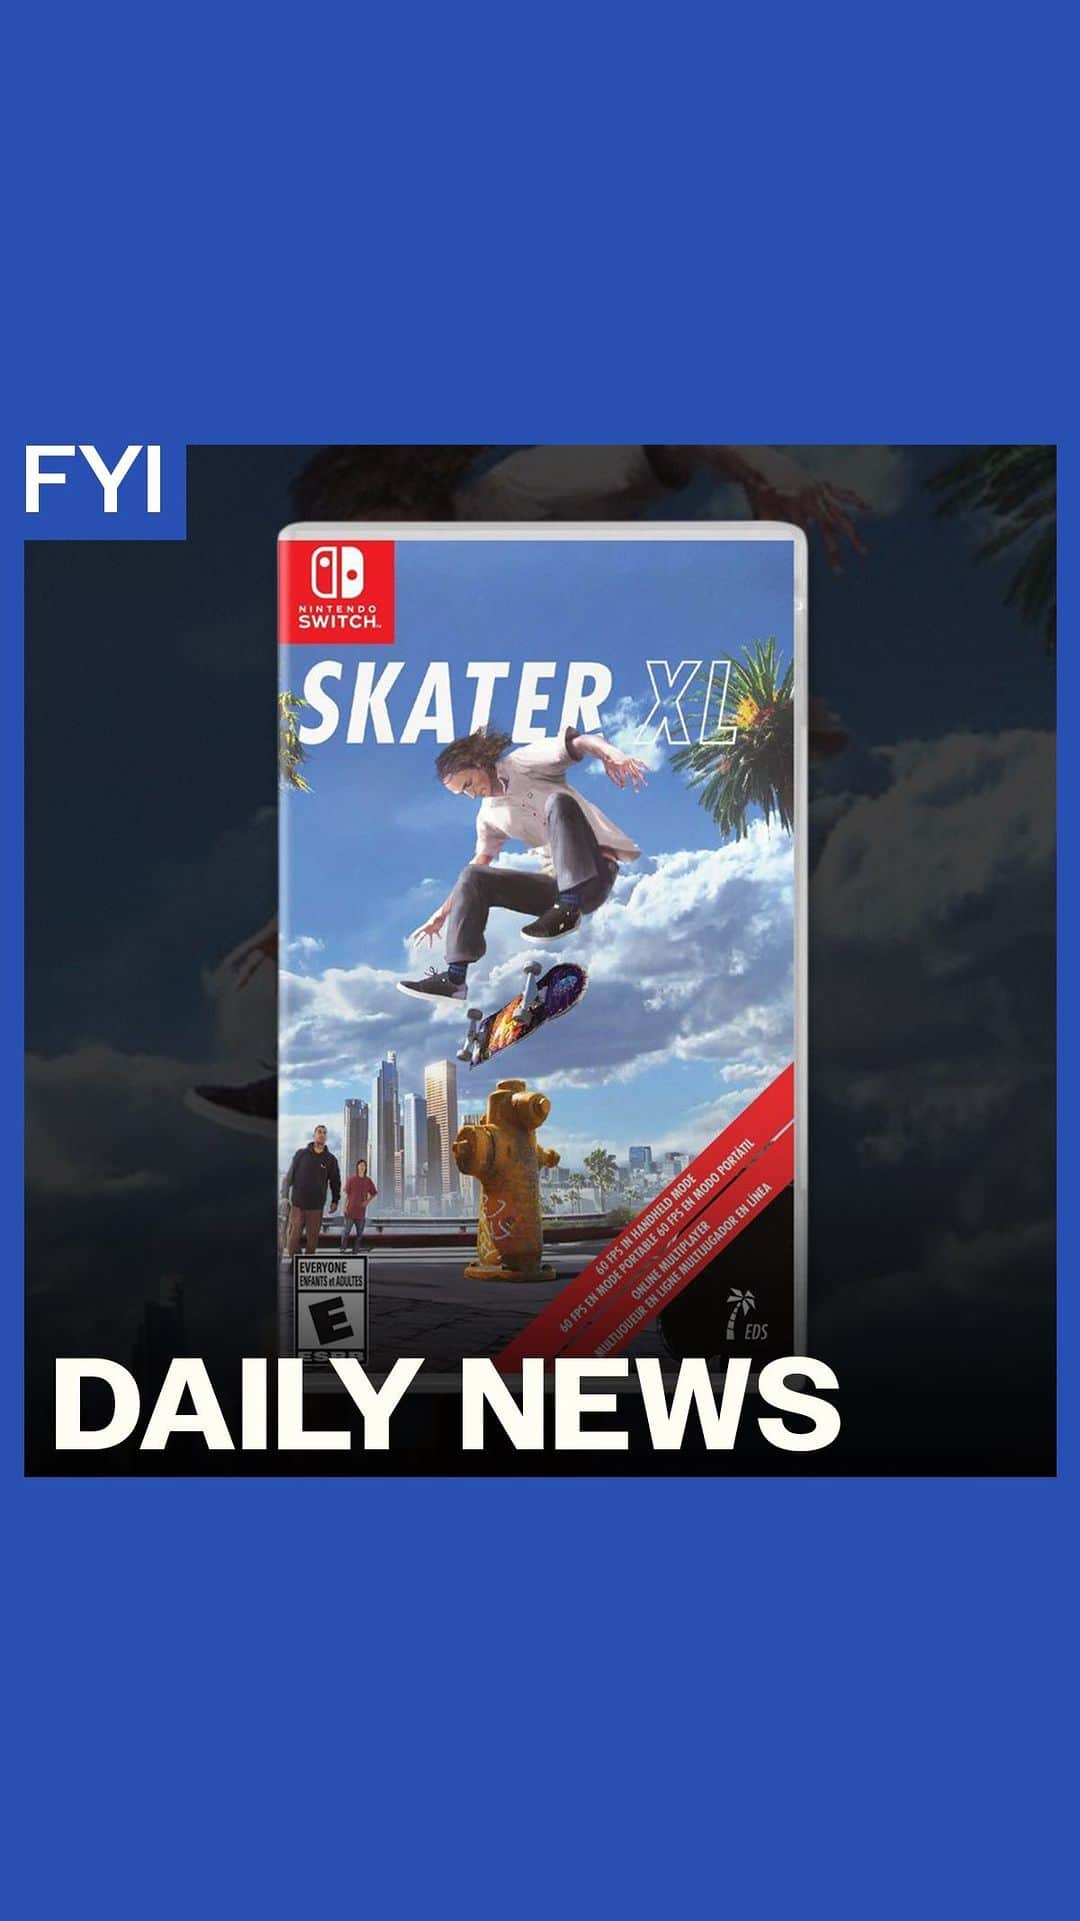 The Berricsのインスタグラム：「Daily News:  @skater.xl is now available in the Nintendo Switch™️ eShop in America and December 12th in Europe and Australia, delivering the full Skater XL experience to the Switch’s on-the-go platform. Optimized to run at a buttery smooth 60 FPS in both handheld an docked mode, Skater XL is fully featured with physics based gameplay, freeskate multiplayer with 10 player rooms, replay editor, playable pros @tiagolemoskt @westgatebrandon @tomasta and @starheadbody , gear from over 30 skate brands and more. Download it now in the eShop or buy the cartridge at video game retailers everywhere.   Hit the link in bio for more news daily on TheBerrics.com #skateboardingisfun #berrics #skaterXL #NintendoSwitch」